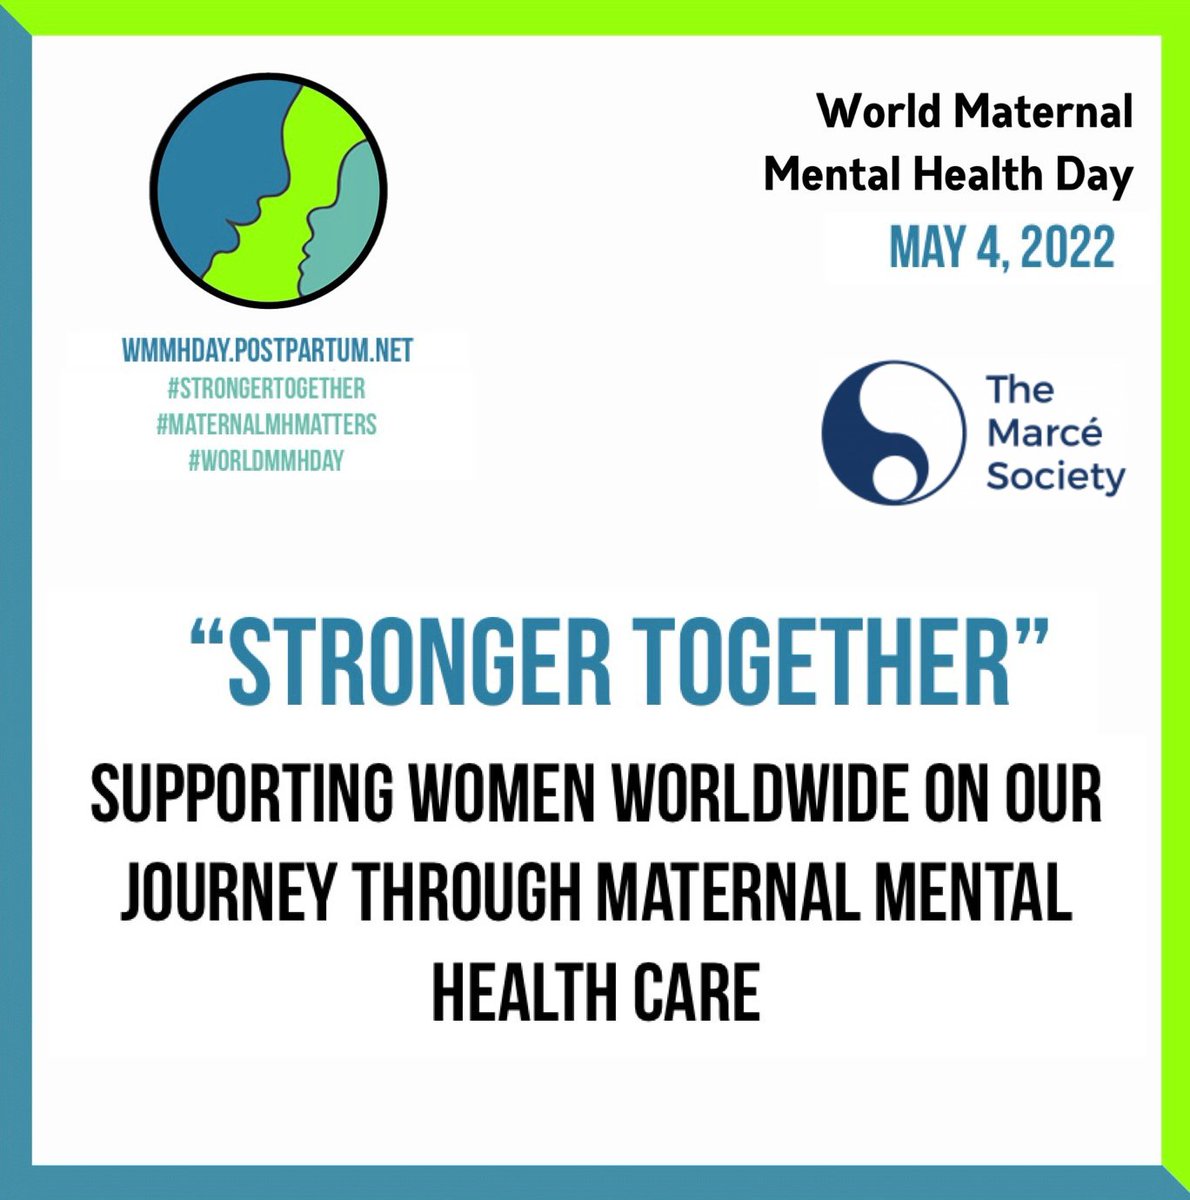 Today is World Maternal Mental Health Day. A worldwide effort to raise awareness of mental health challenges that many women may experience during pregnancy and into parenthood. wmmhday.postpartum.net

#maternalMHmatters #worldMMHday #marceaustralasia